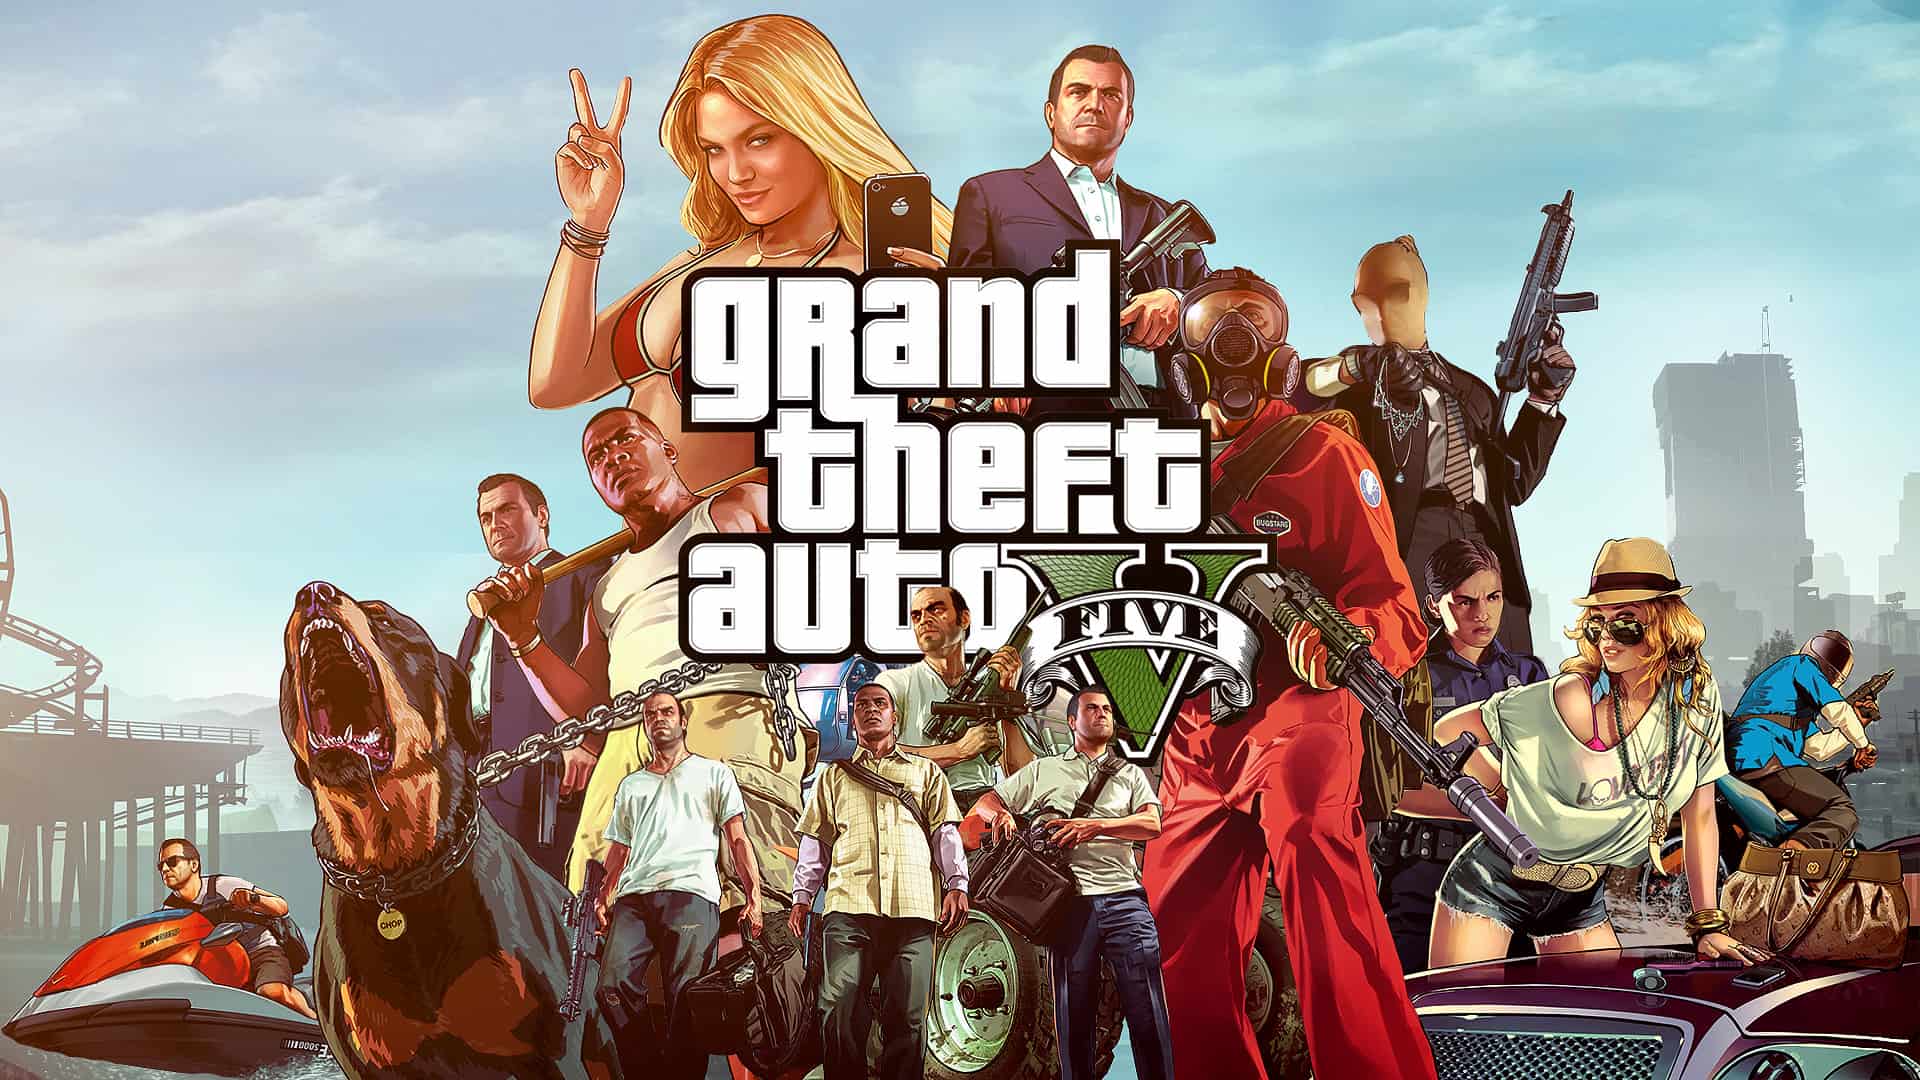 Emuler Forsømme rille How much data does Grand Theft Auto V use?